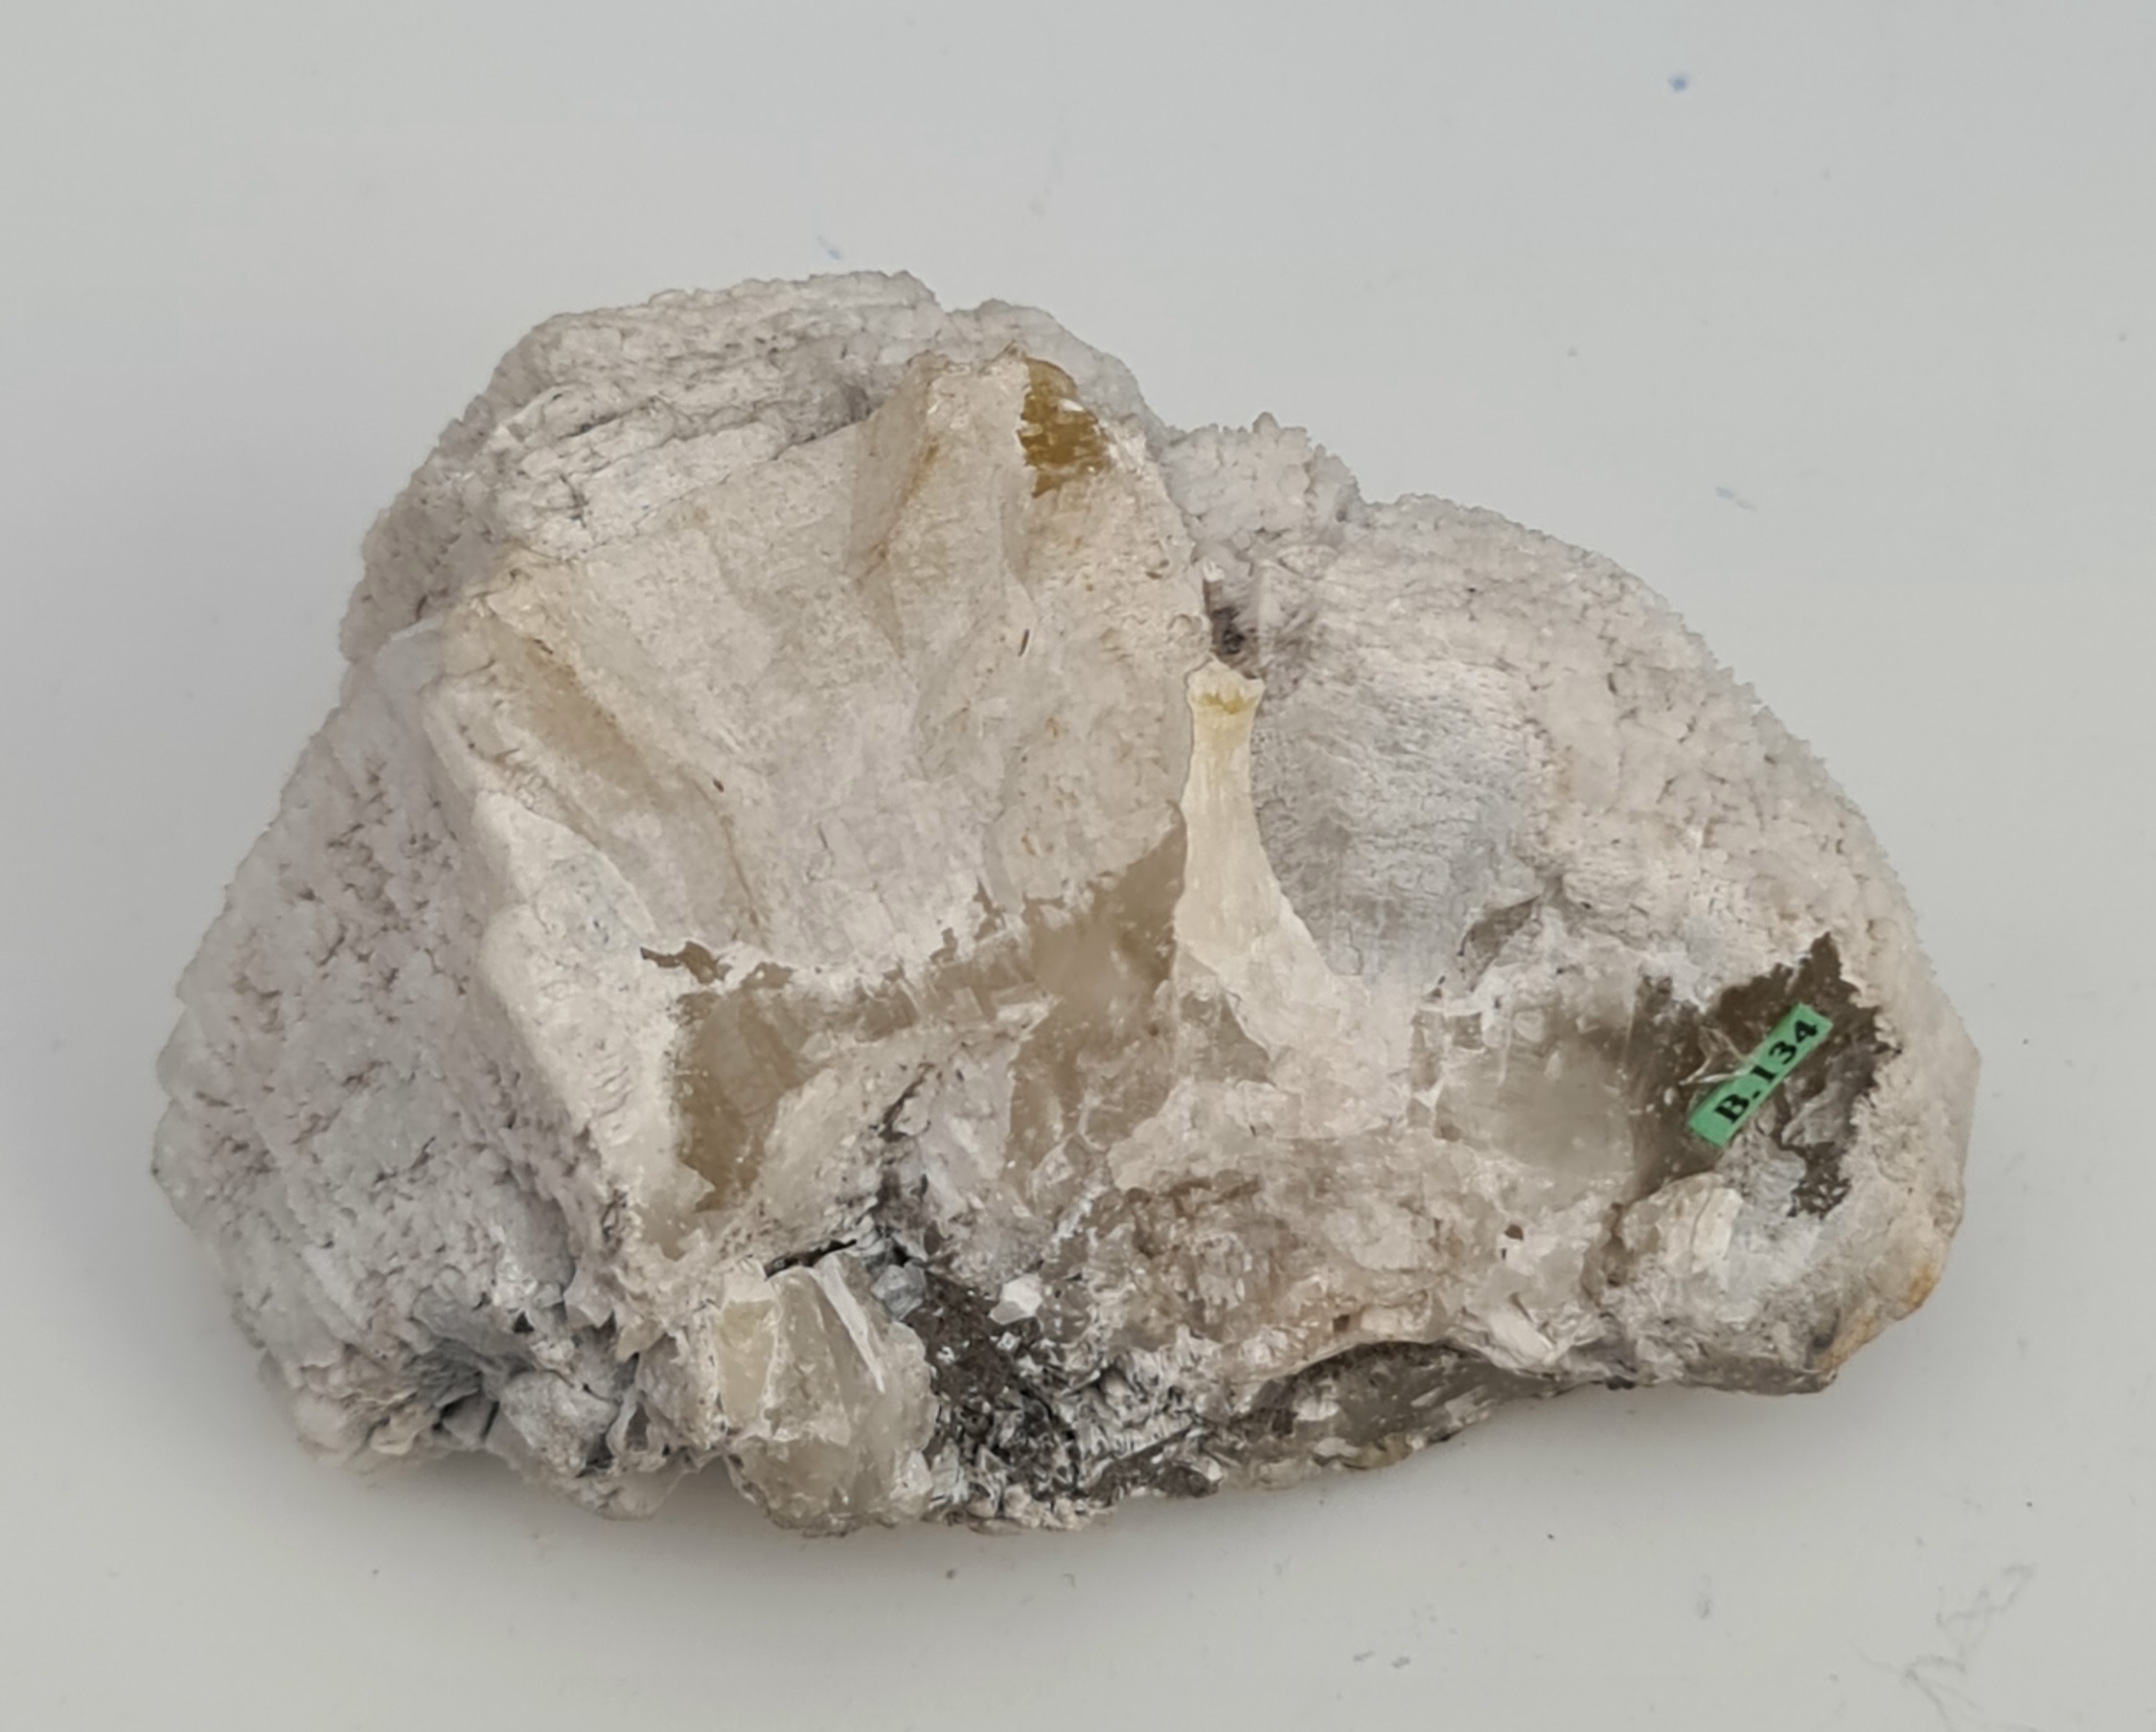 Collectable Minerals Witherite Nentsberry Haggs Mine Alston Moor Nenthead Cumbria - Image 2 of 2